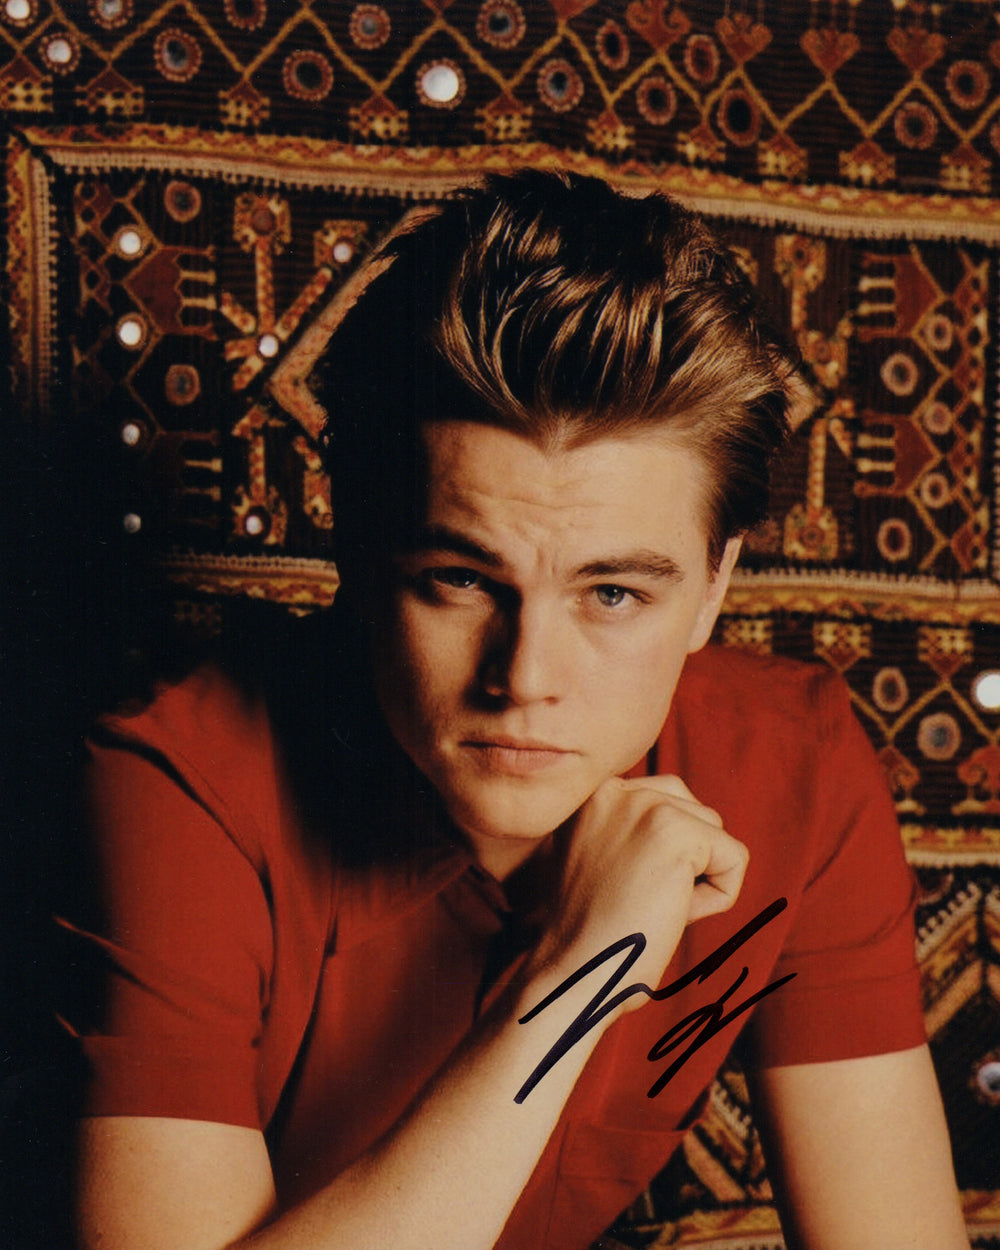 Leonardo DiCaprio from Titanic, Catch Me If You Can, The Departed, & Inception Signed 8x10 Photo